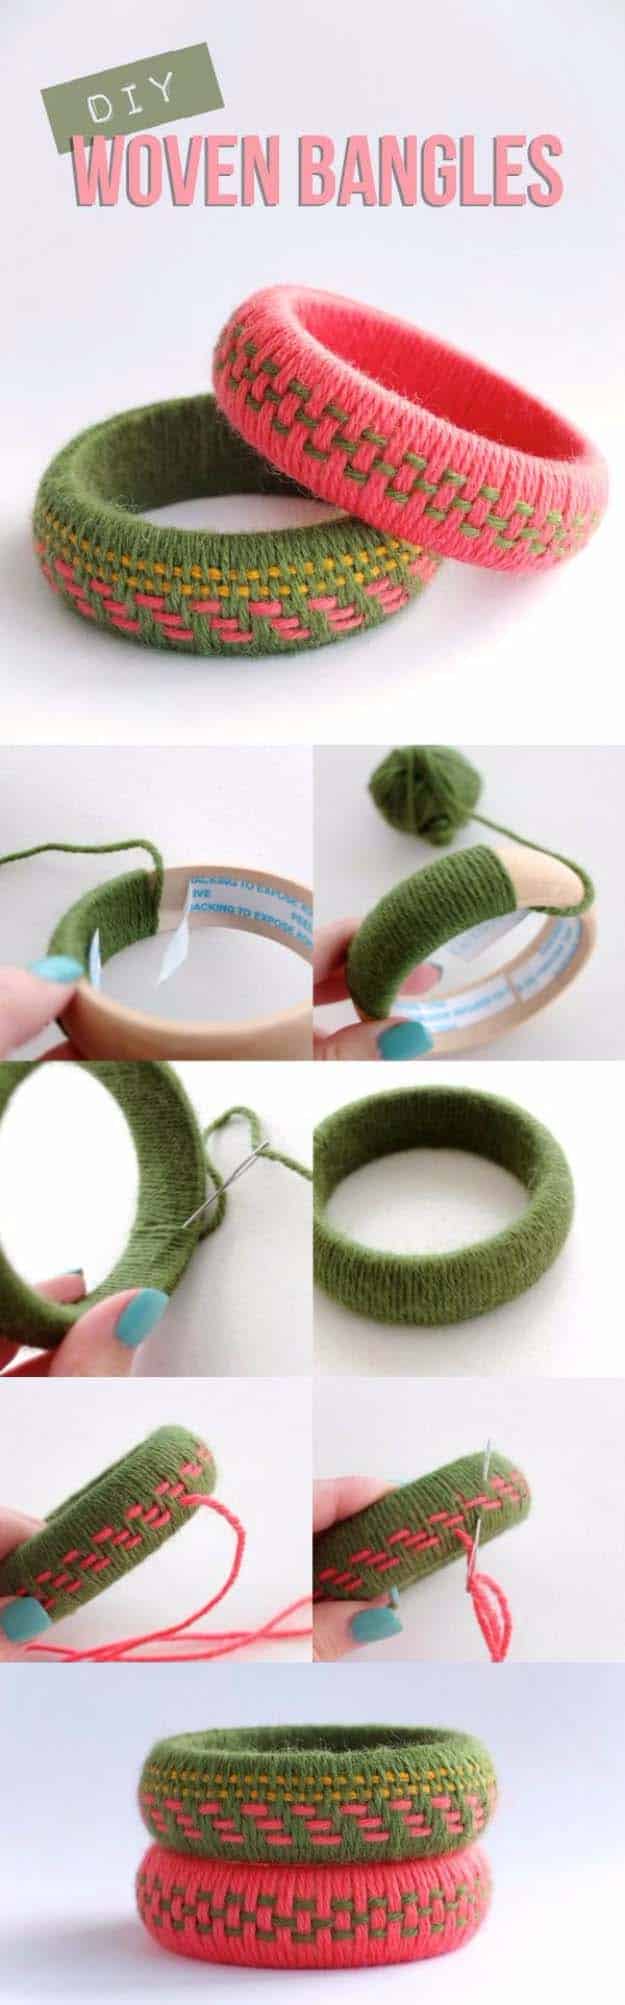 DIY Gifts for Your Girlfriend and Cool Homemade Gift Ideas for Her | Easy Creative DIY Projects and Tutorials for Christmas, Birthday and Anniversary Gifts for Mom, Sister, Aunt, Teacher or Friends | DIY Woven Yarn Bangles for Unique Homemade Present #diygifts #diyideas